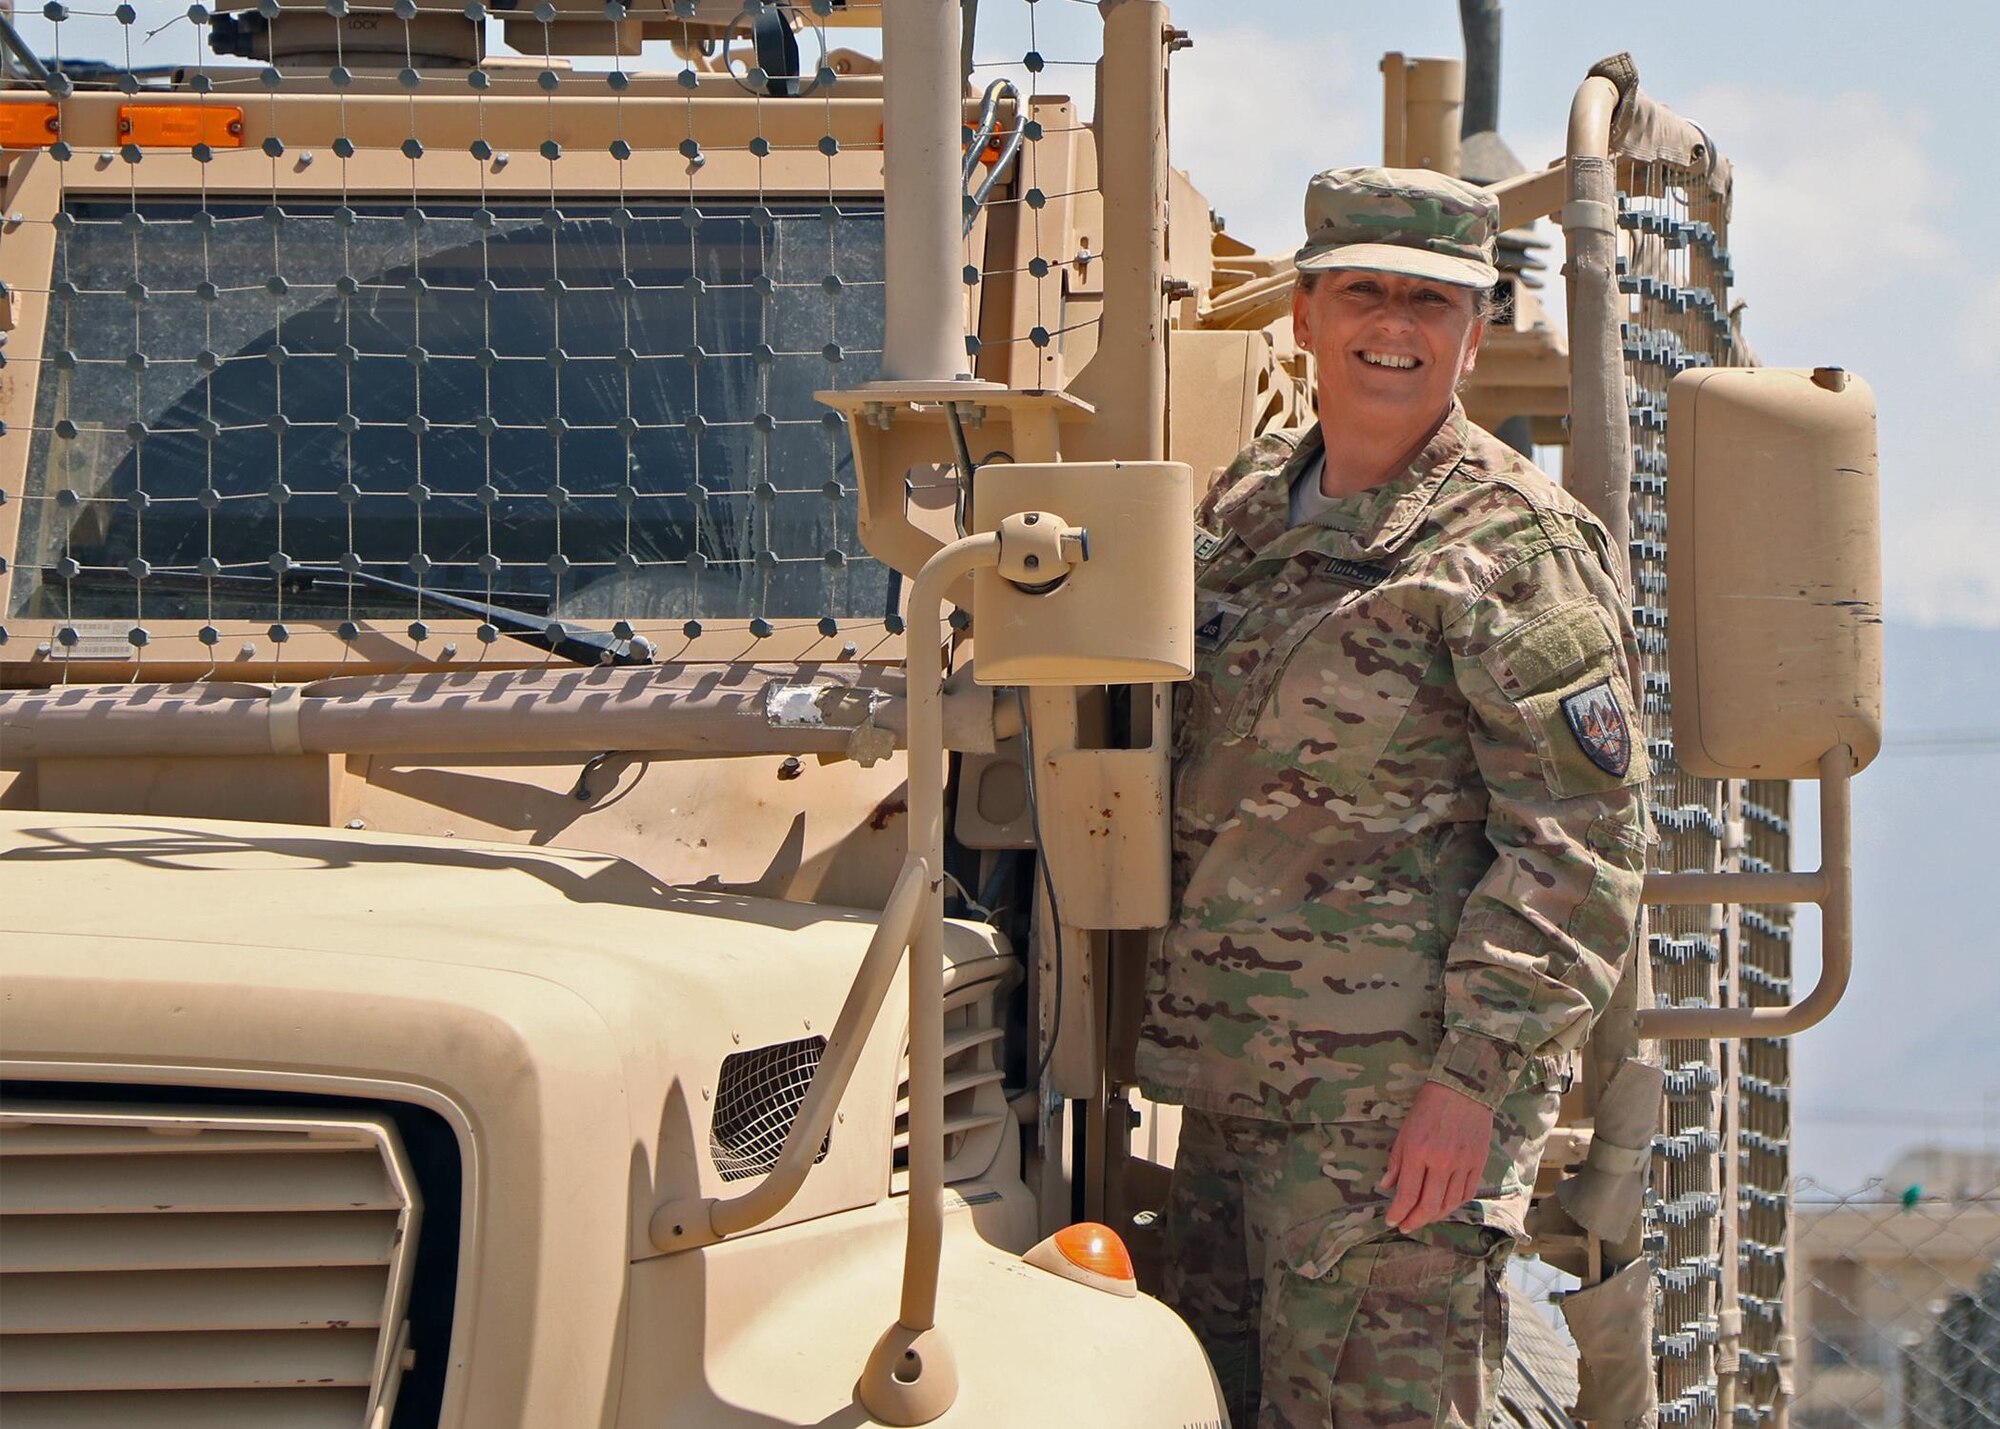 Melissa E. Lewman, the master planning manager and directorate of public works assigned to U.S. Forces-Afghanistan, stands on an armored vehicle at Bagram Airfield (BAF), Afghanistan, May 11, 2016. Lewman was responsible for managing more than 77 high profile projects and overseeing identification and documentation of more than 2,800 properties on BAF. (U.S. Army photo by Jet Fabara) 